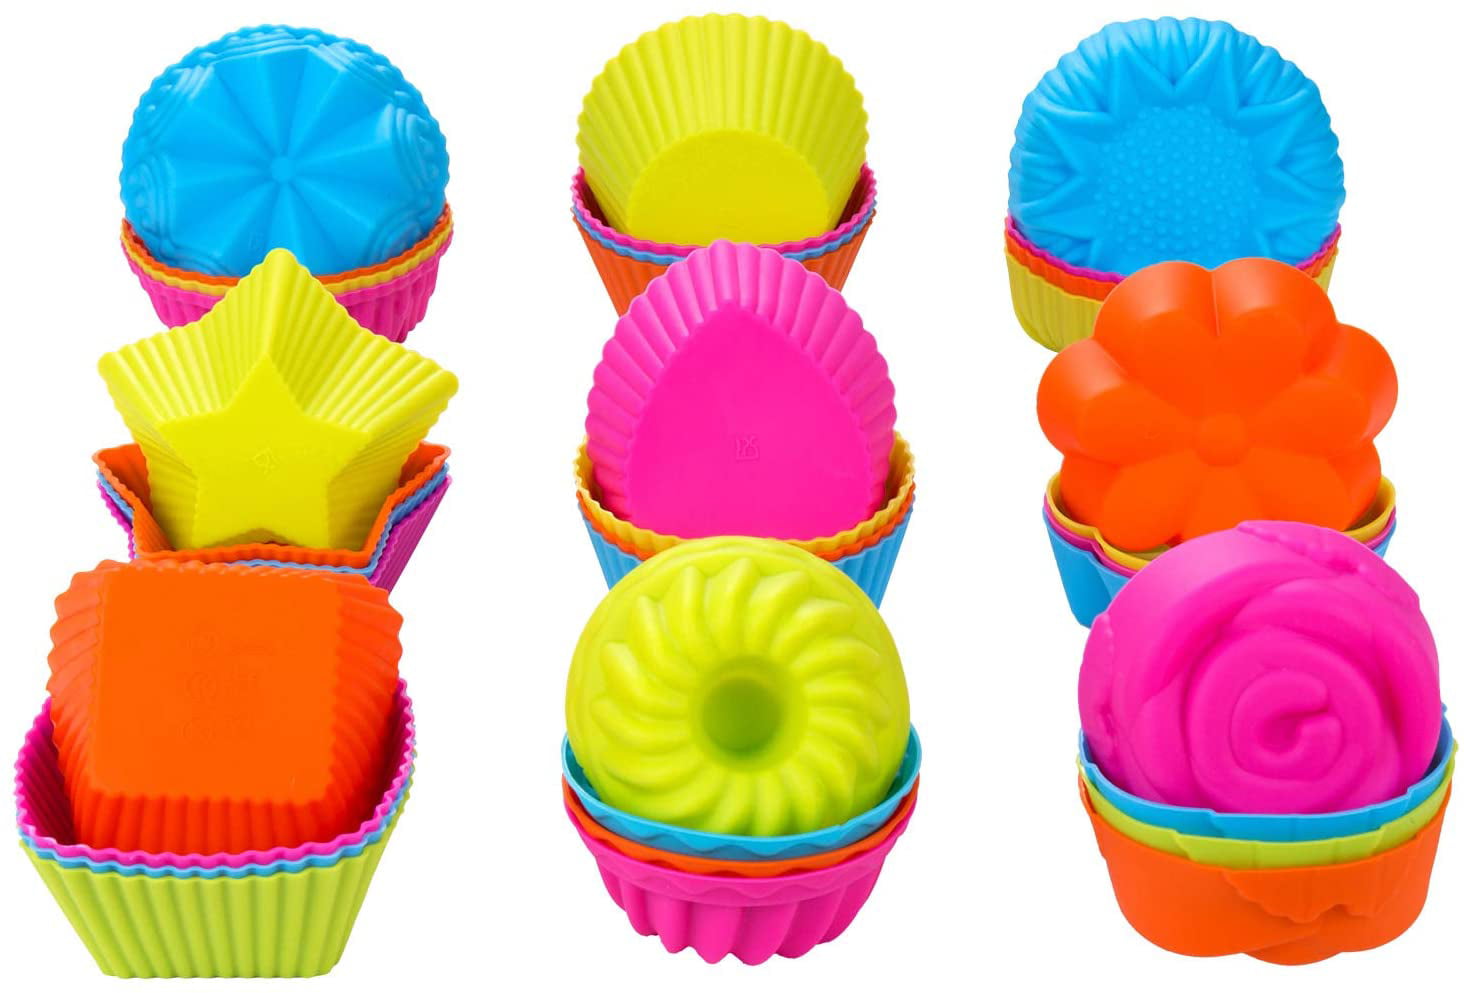 Silicone Cupcake Baking Molds Non Stick Cake Cups Sets Muffin Liners 36 Pack